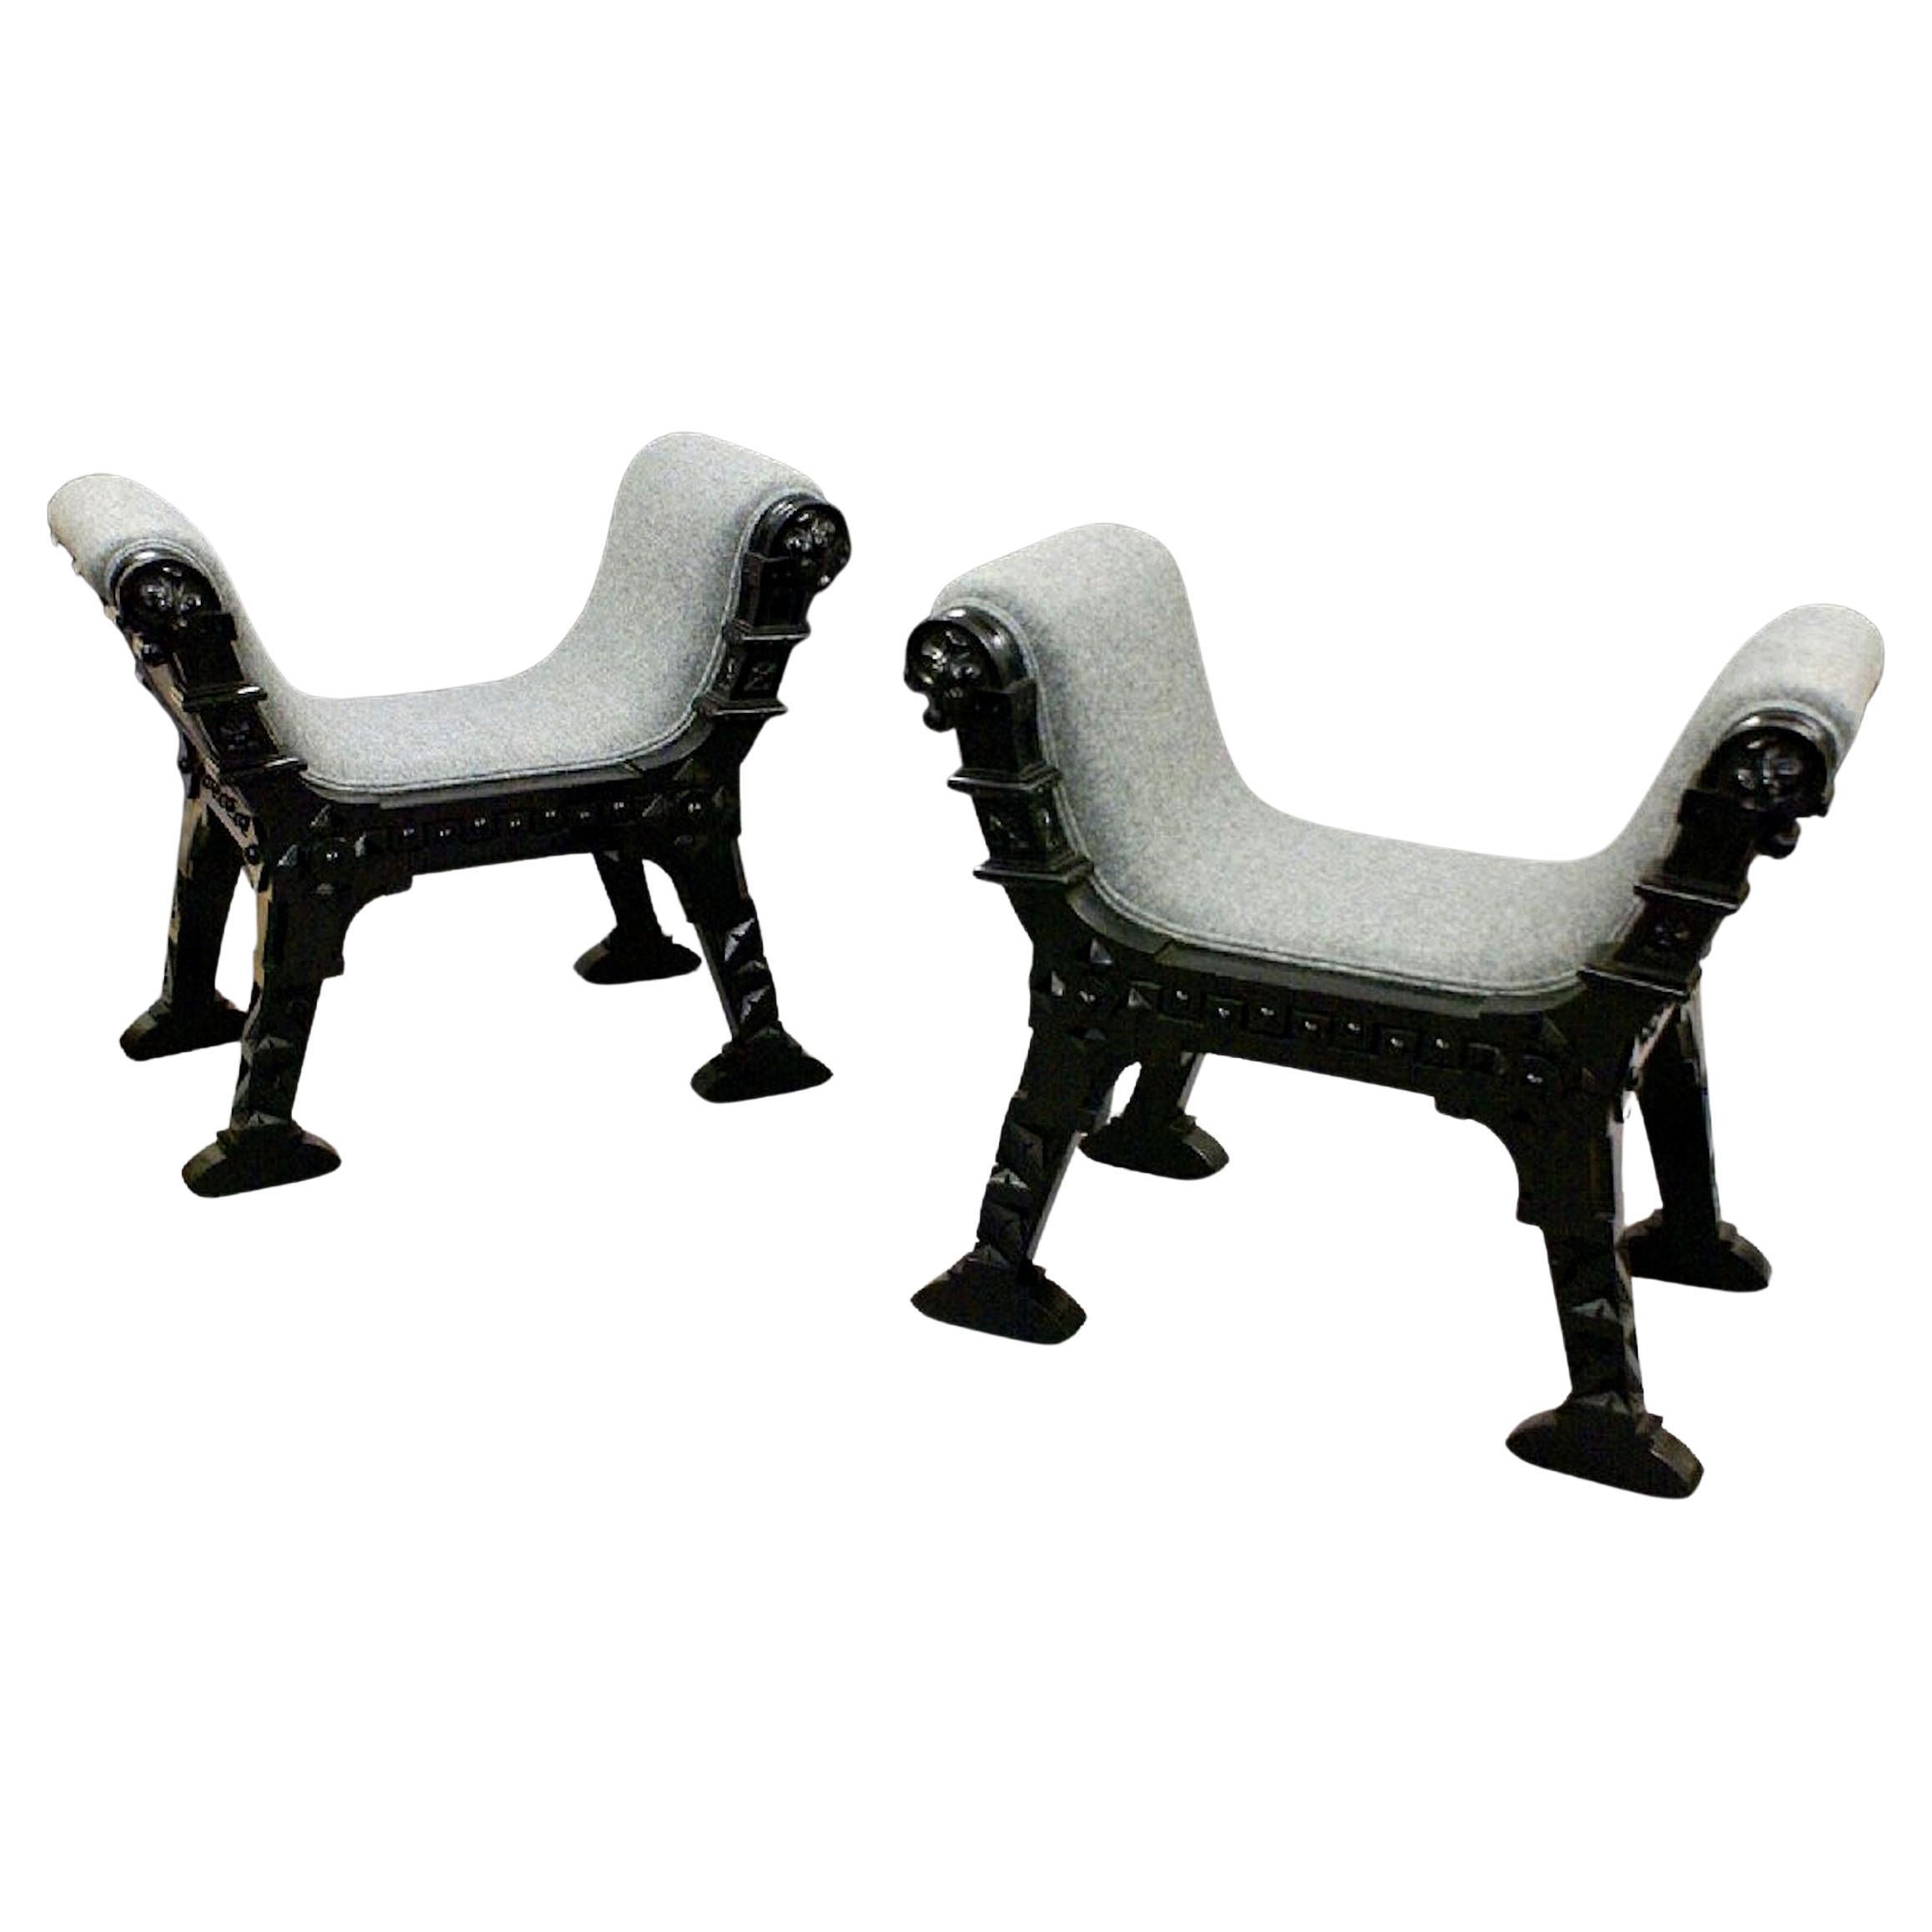 Pair of 19th C. Upholstered Window Seats